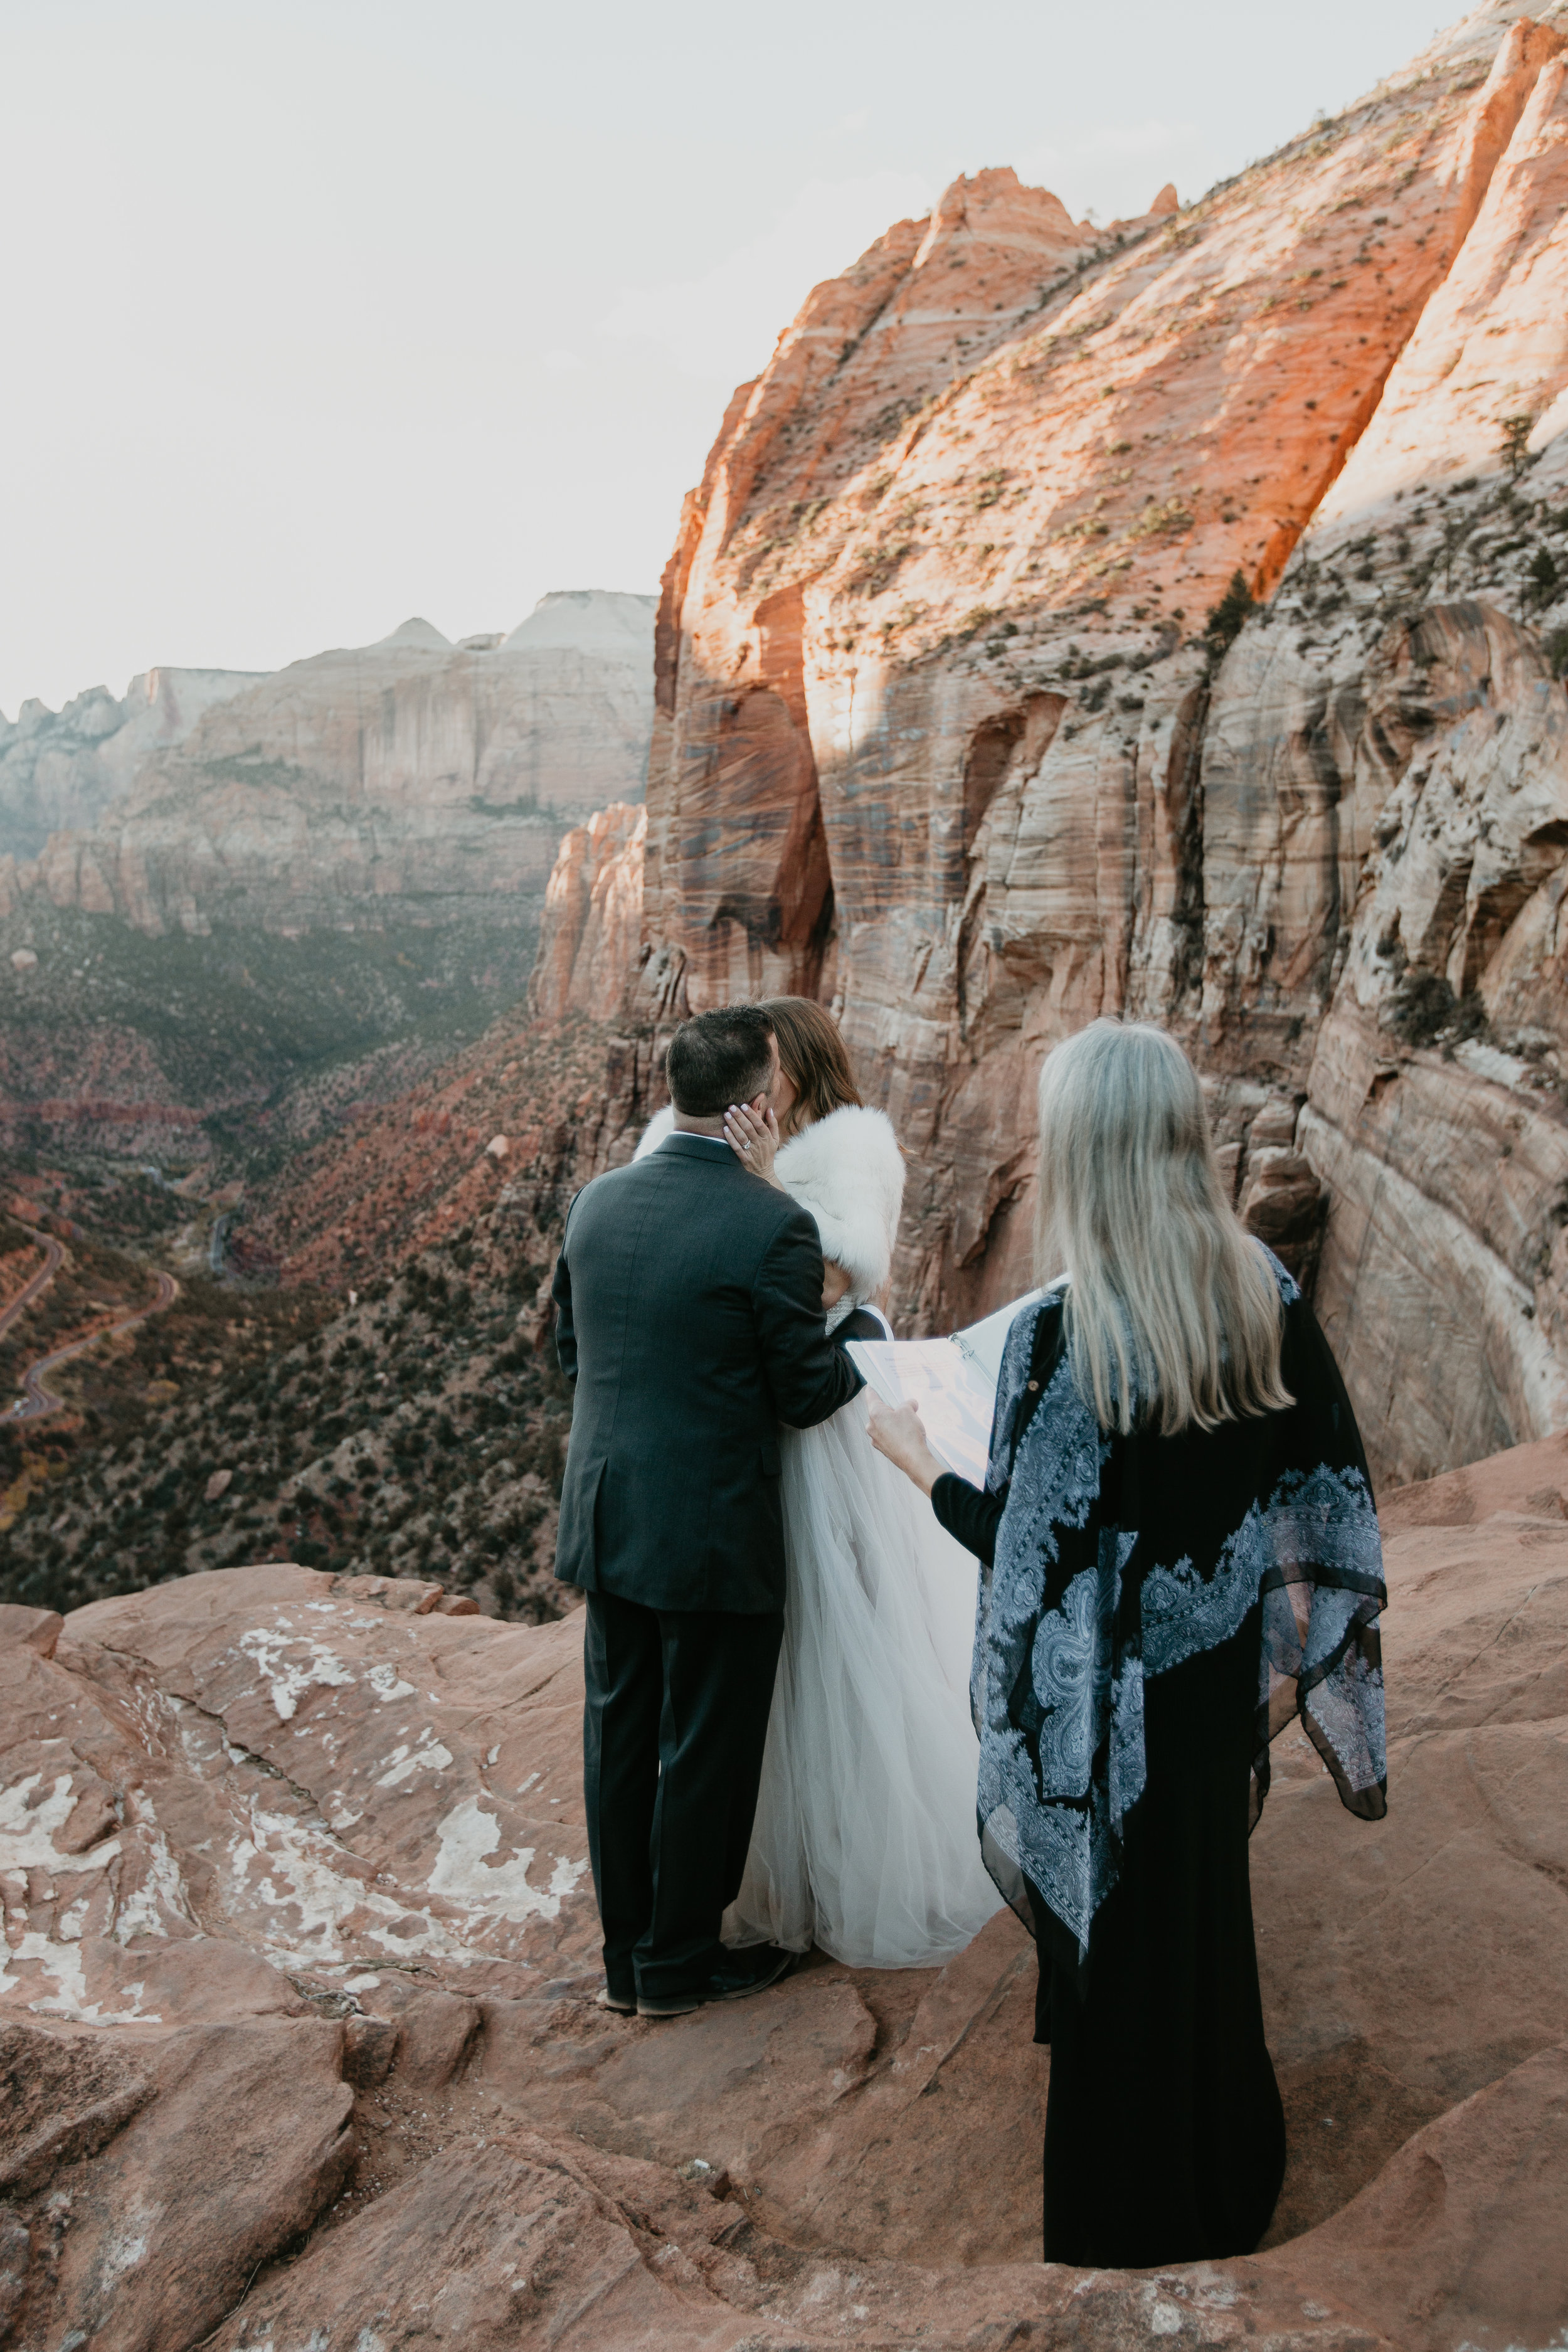 nicole-daacke-photography-zion-national-park-elopement-photographer-canyon-overlook-trail-elope-hiking-adventure-wedding-photos-fall-utah-red-rock-canyon-stgeorge-eloping-photographer-61.jpg